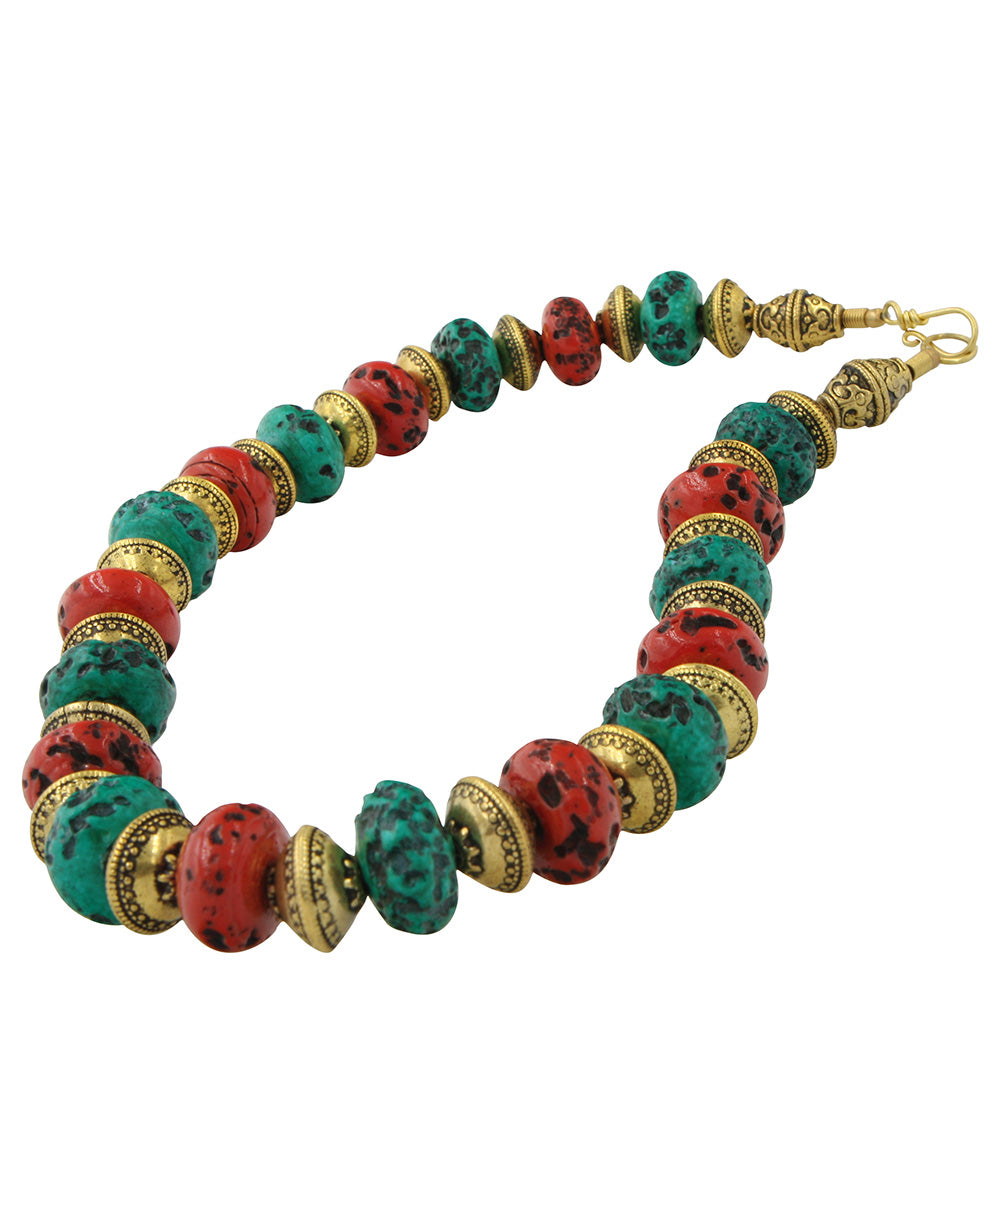 Tibetan Beaded Tribal Necklace with Embossed Brass 